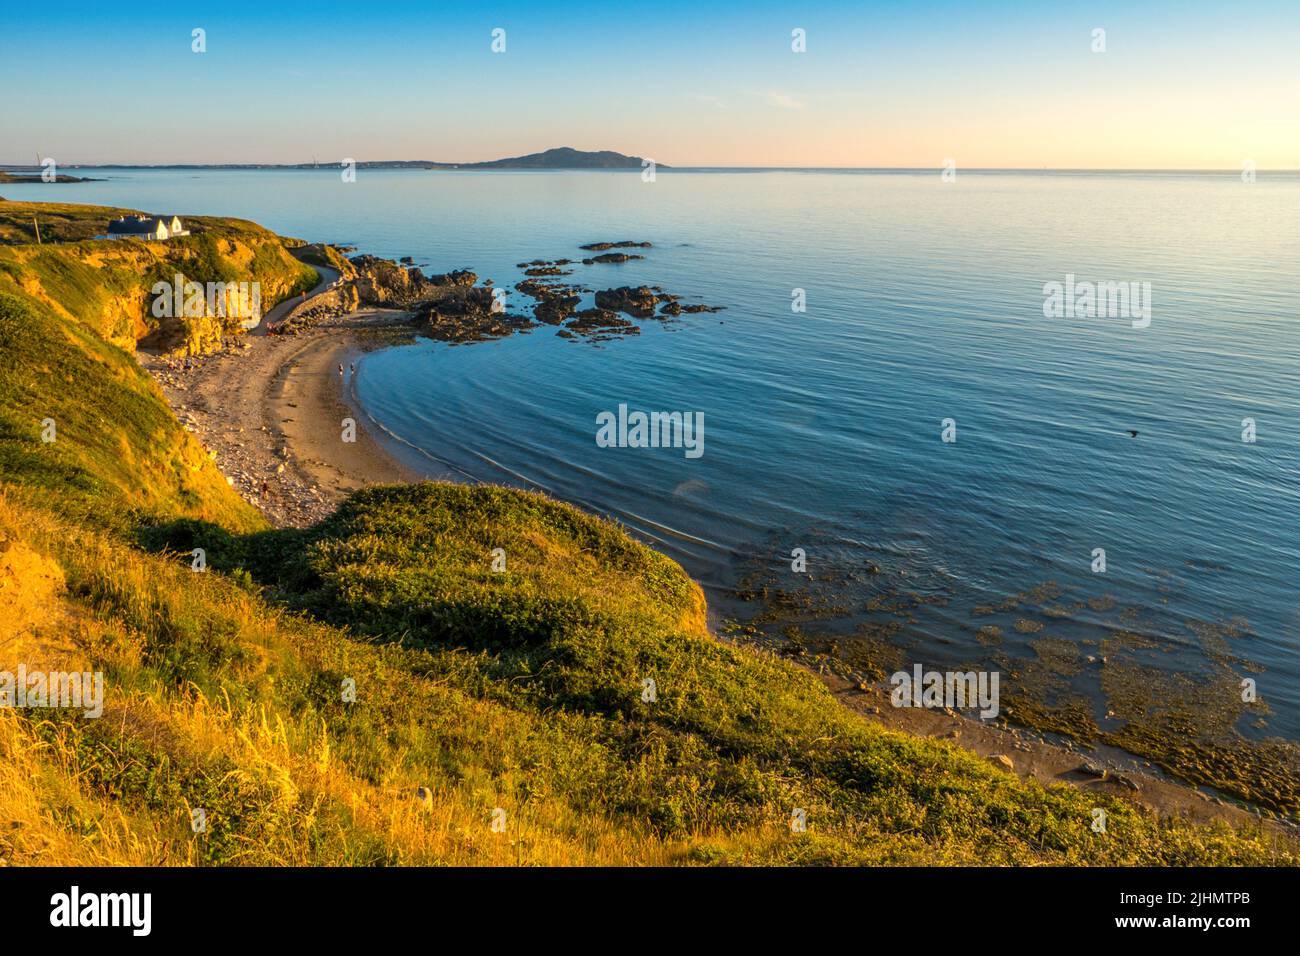 Church Bay on the coast of Anglesey, North Wales, UK Stock Photo